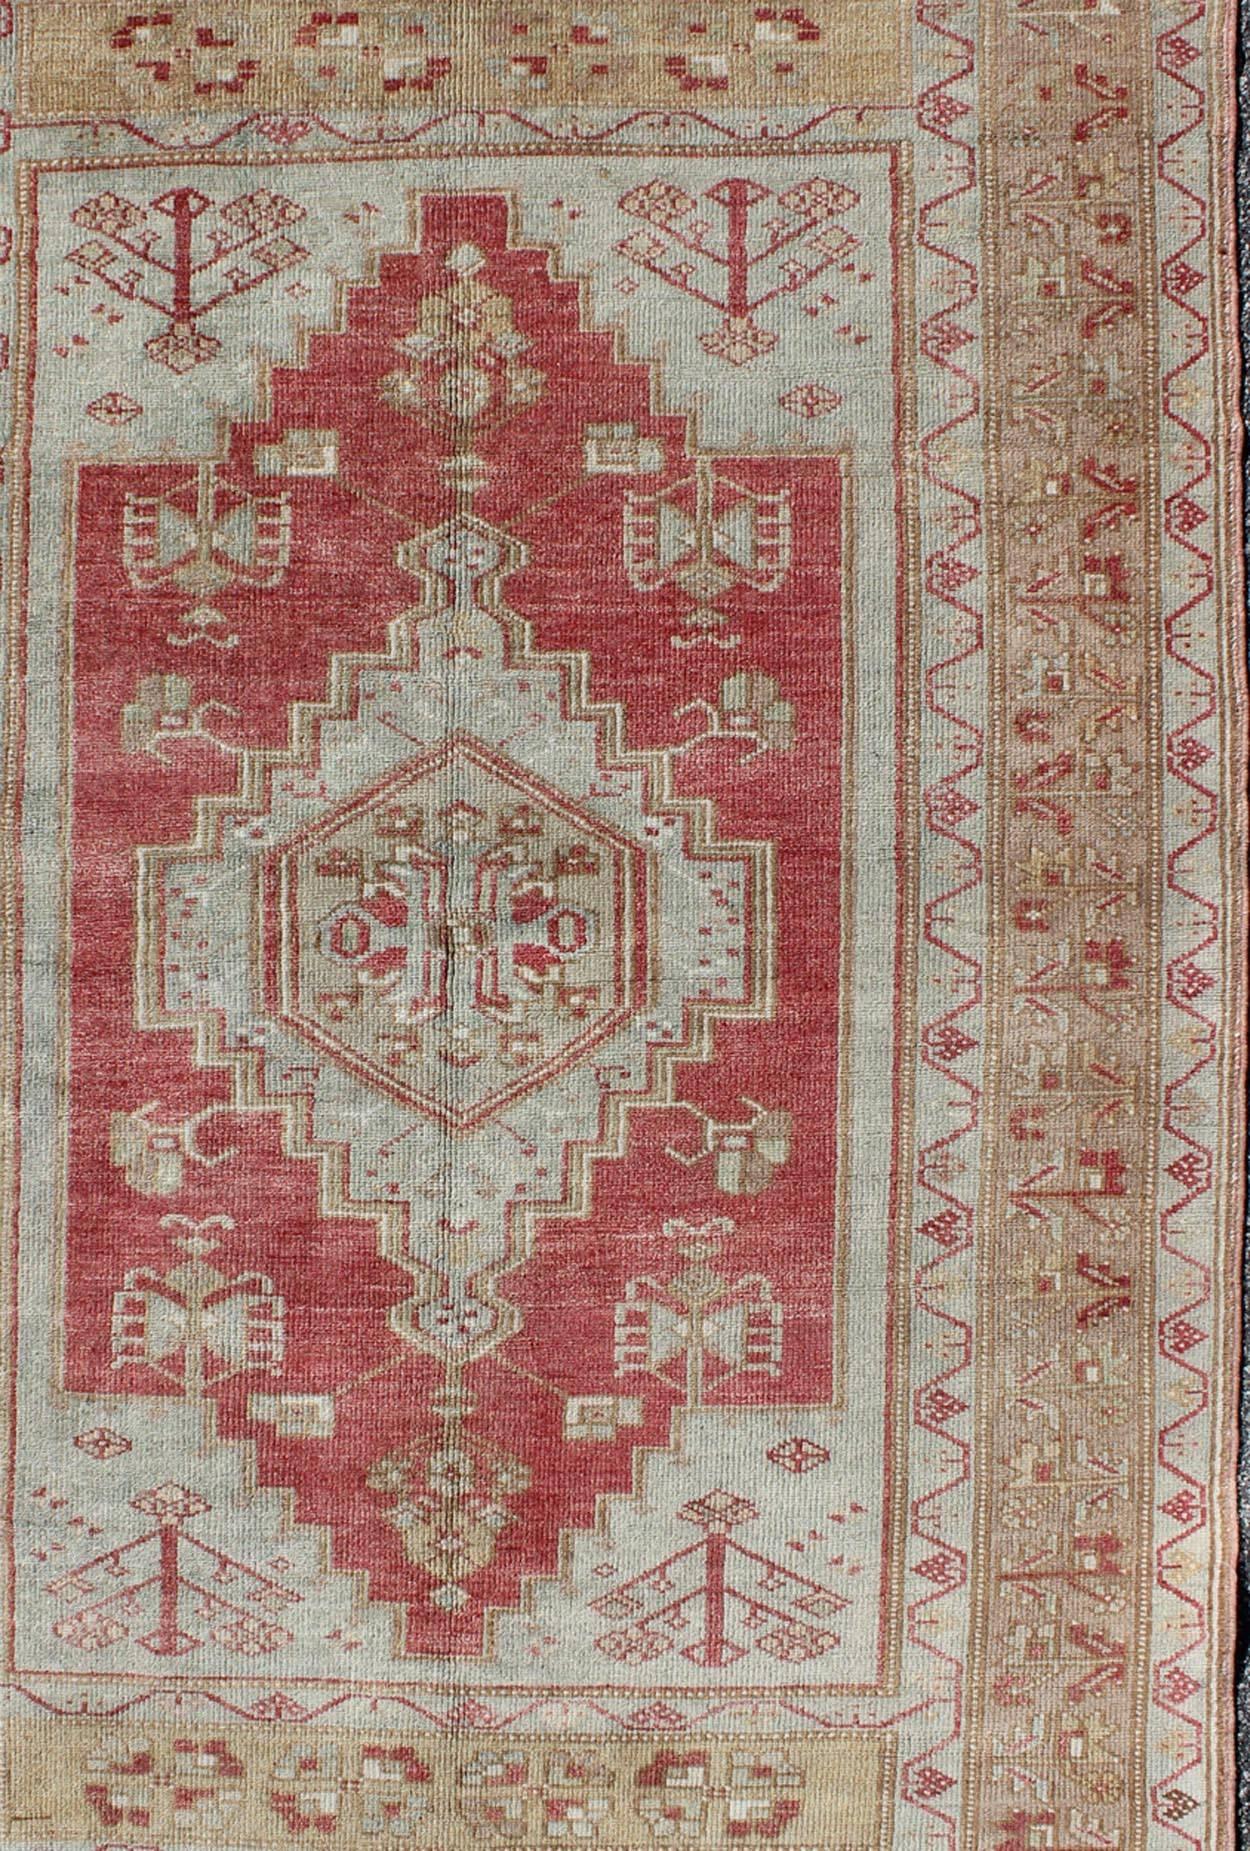 Turkish Antique 1930's Oushak Rug with Geometric Motifs  In Good Condition For Sale In Atlanta, GA